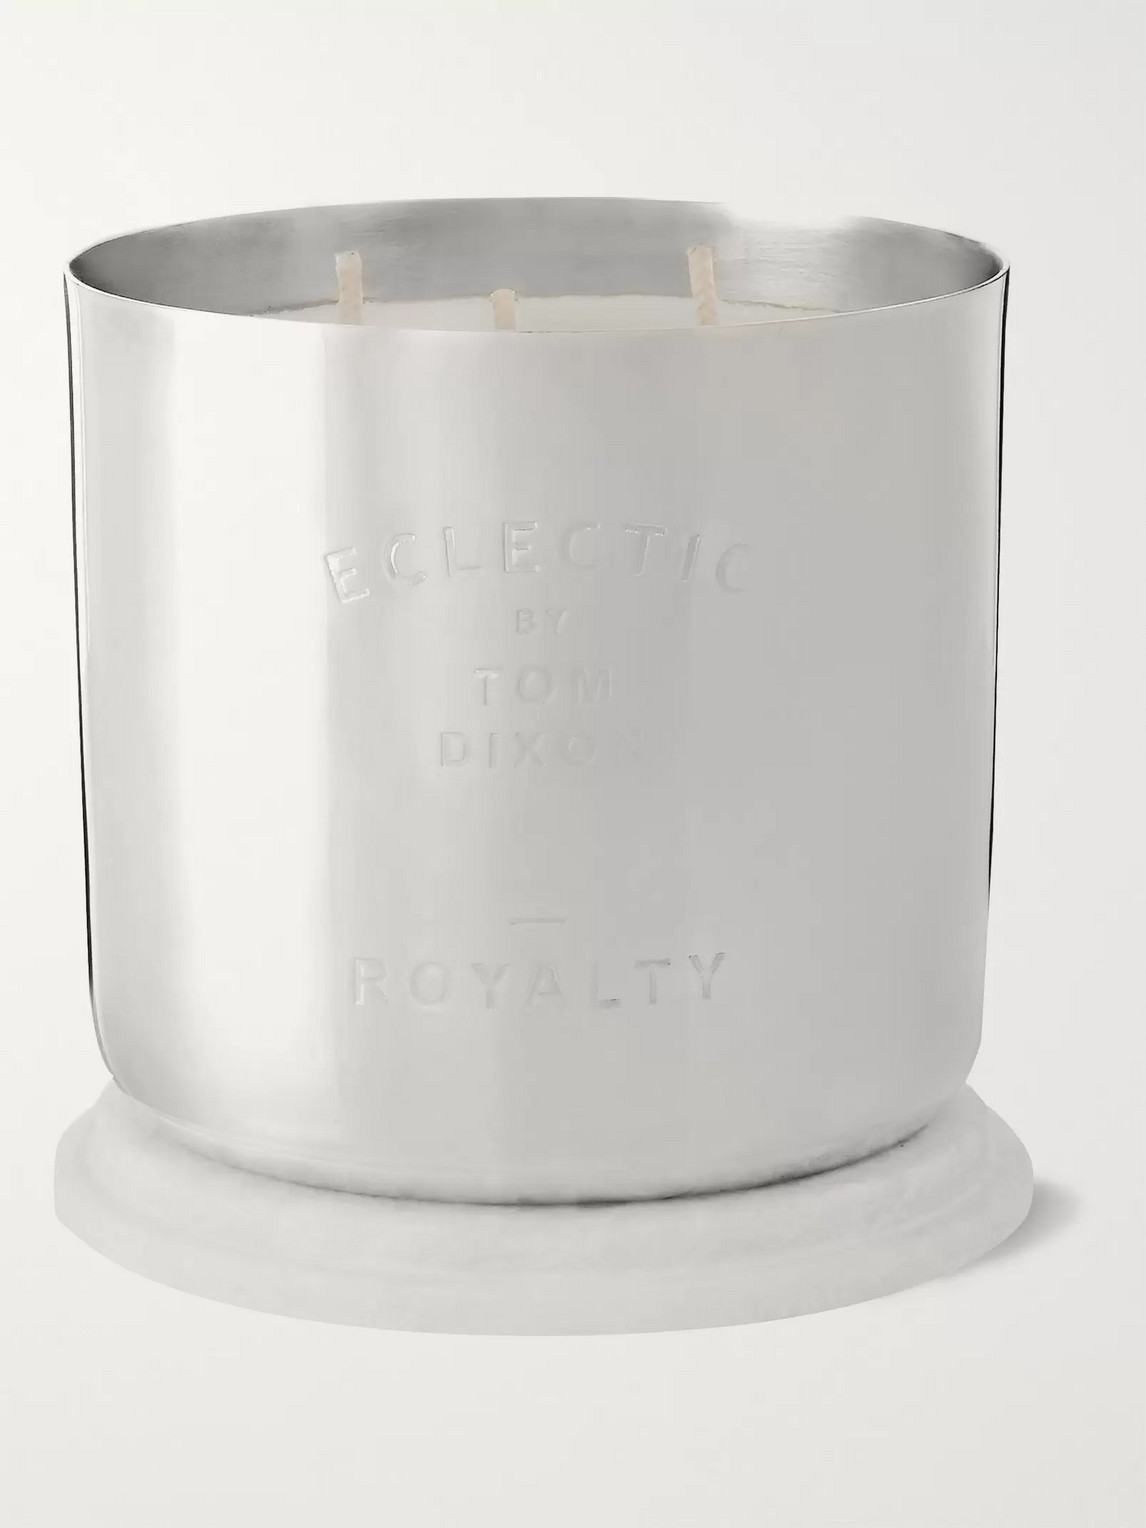 Tom Dixon Royalty Scented Candle, 540g In Silver